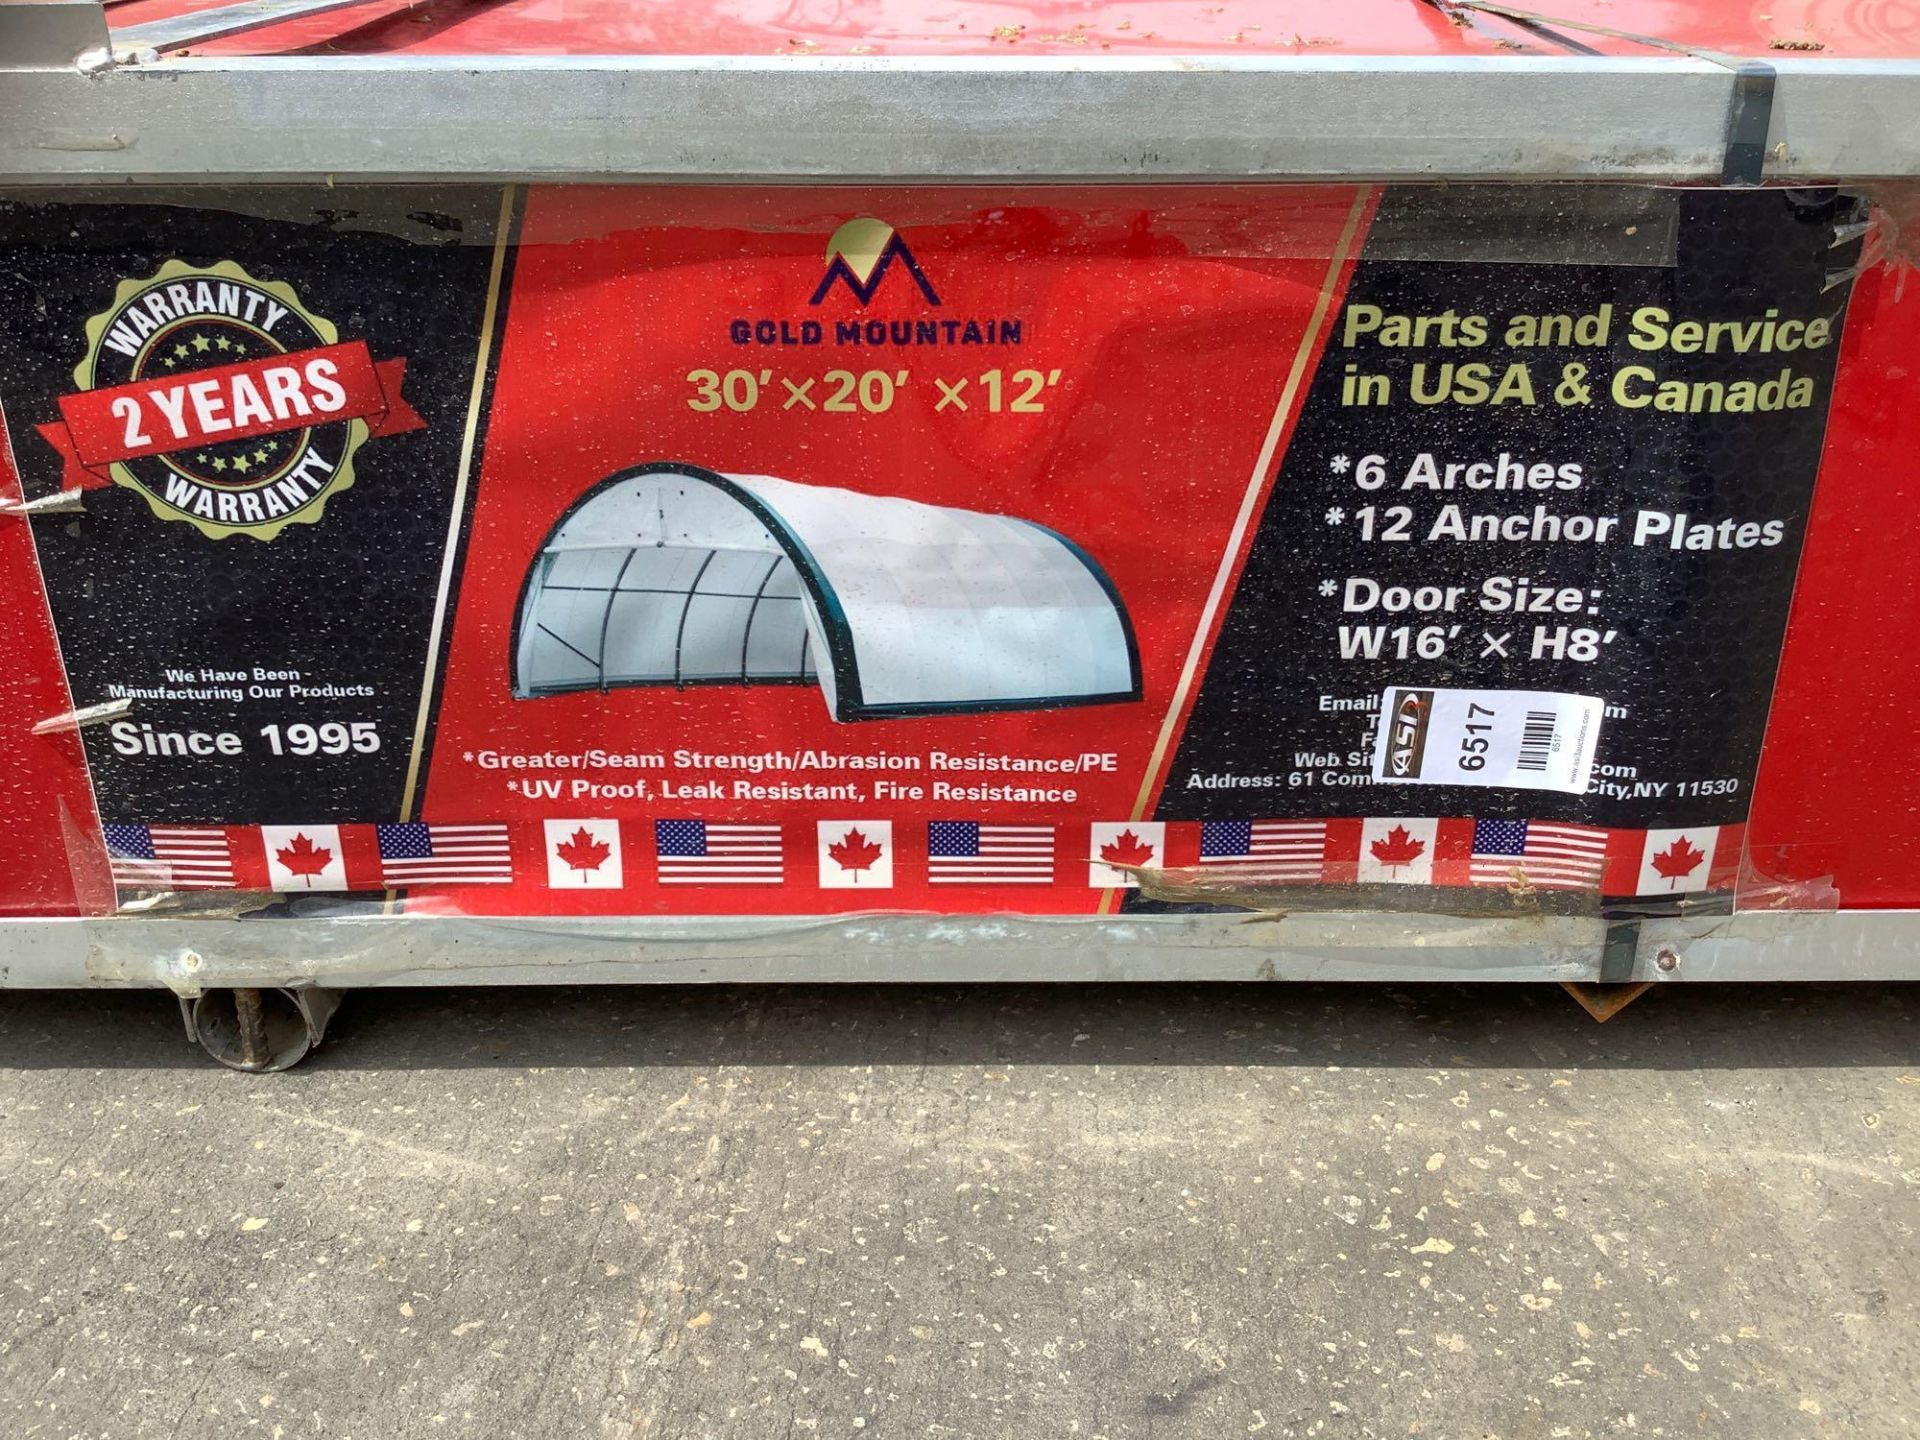 UNUSED GOLD MOUNTAIN DOME STORAGE SHELTER MODEL S203012R , APPROX 30' x 20' x 12', UV PROOF, LEAK RE - Image 5 of 5